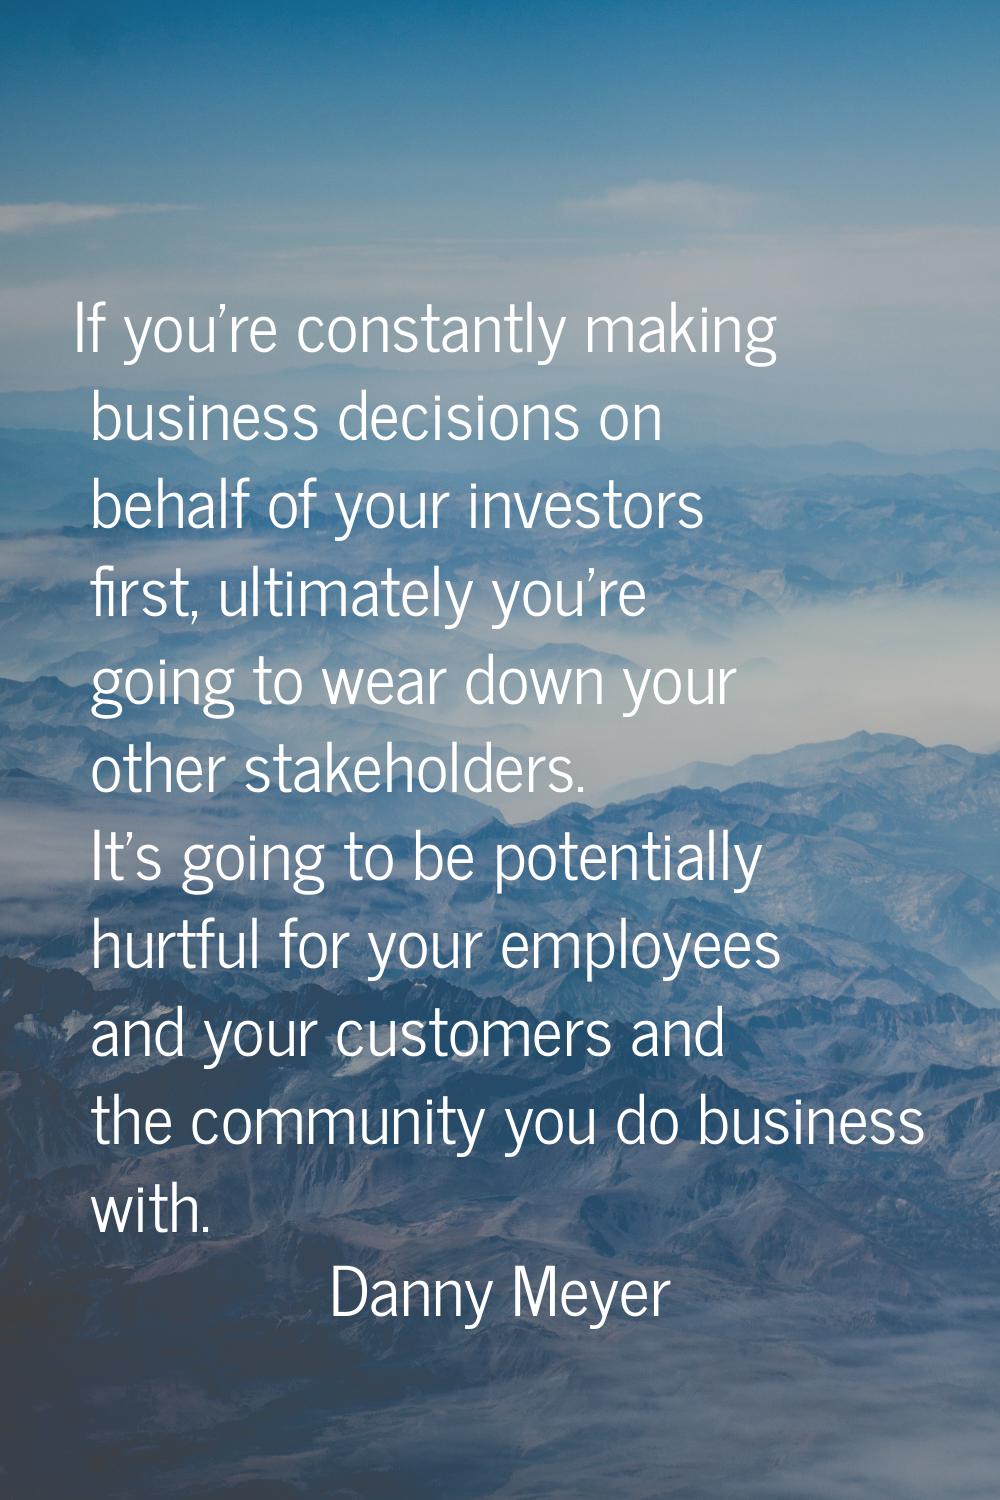 If you're constantly making business decisions on behalf of your investors first, ultimately you're